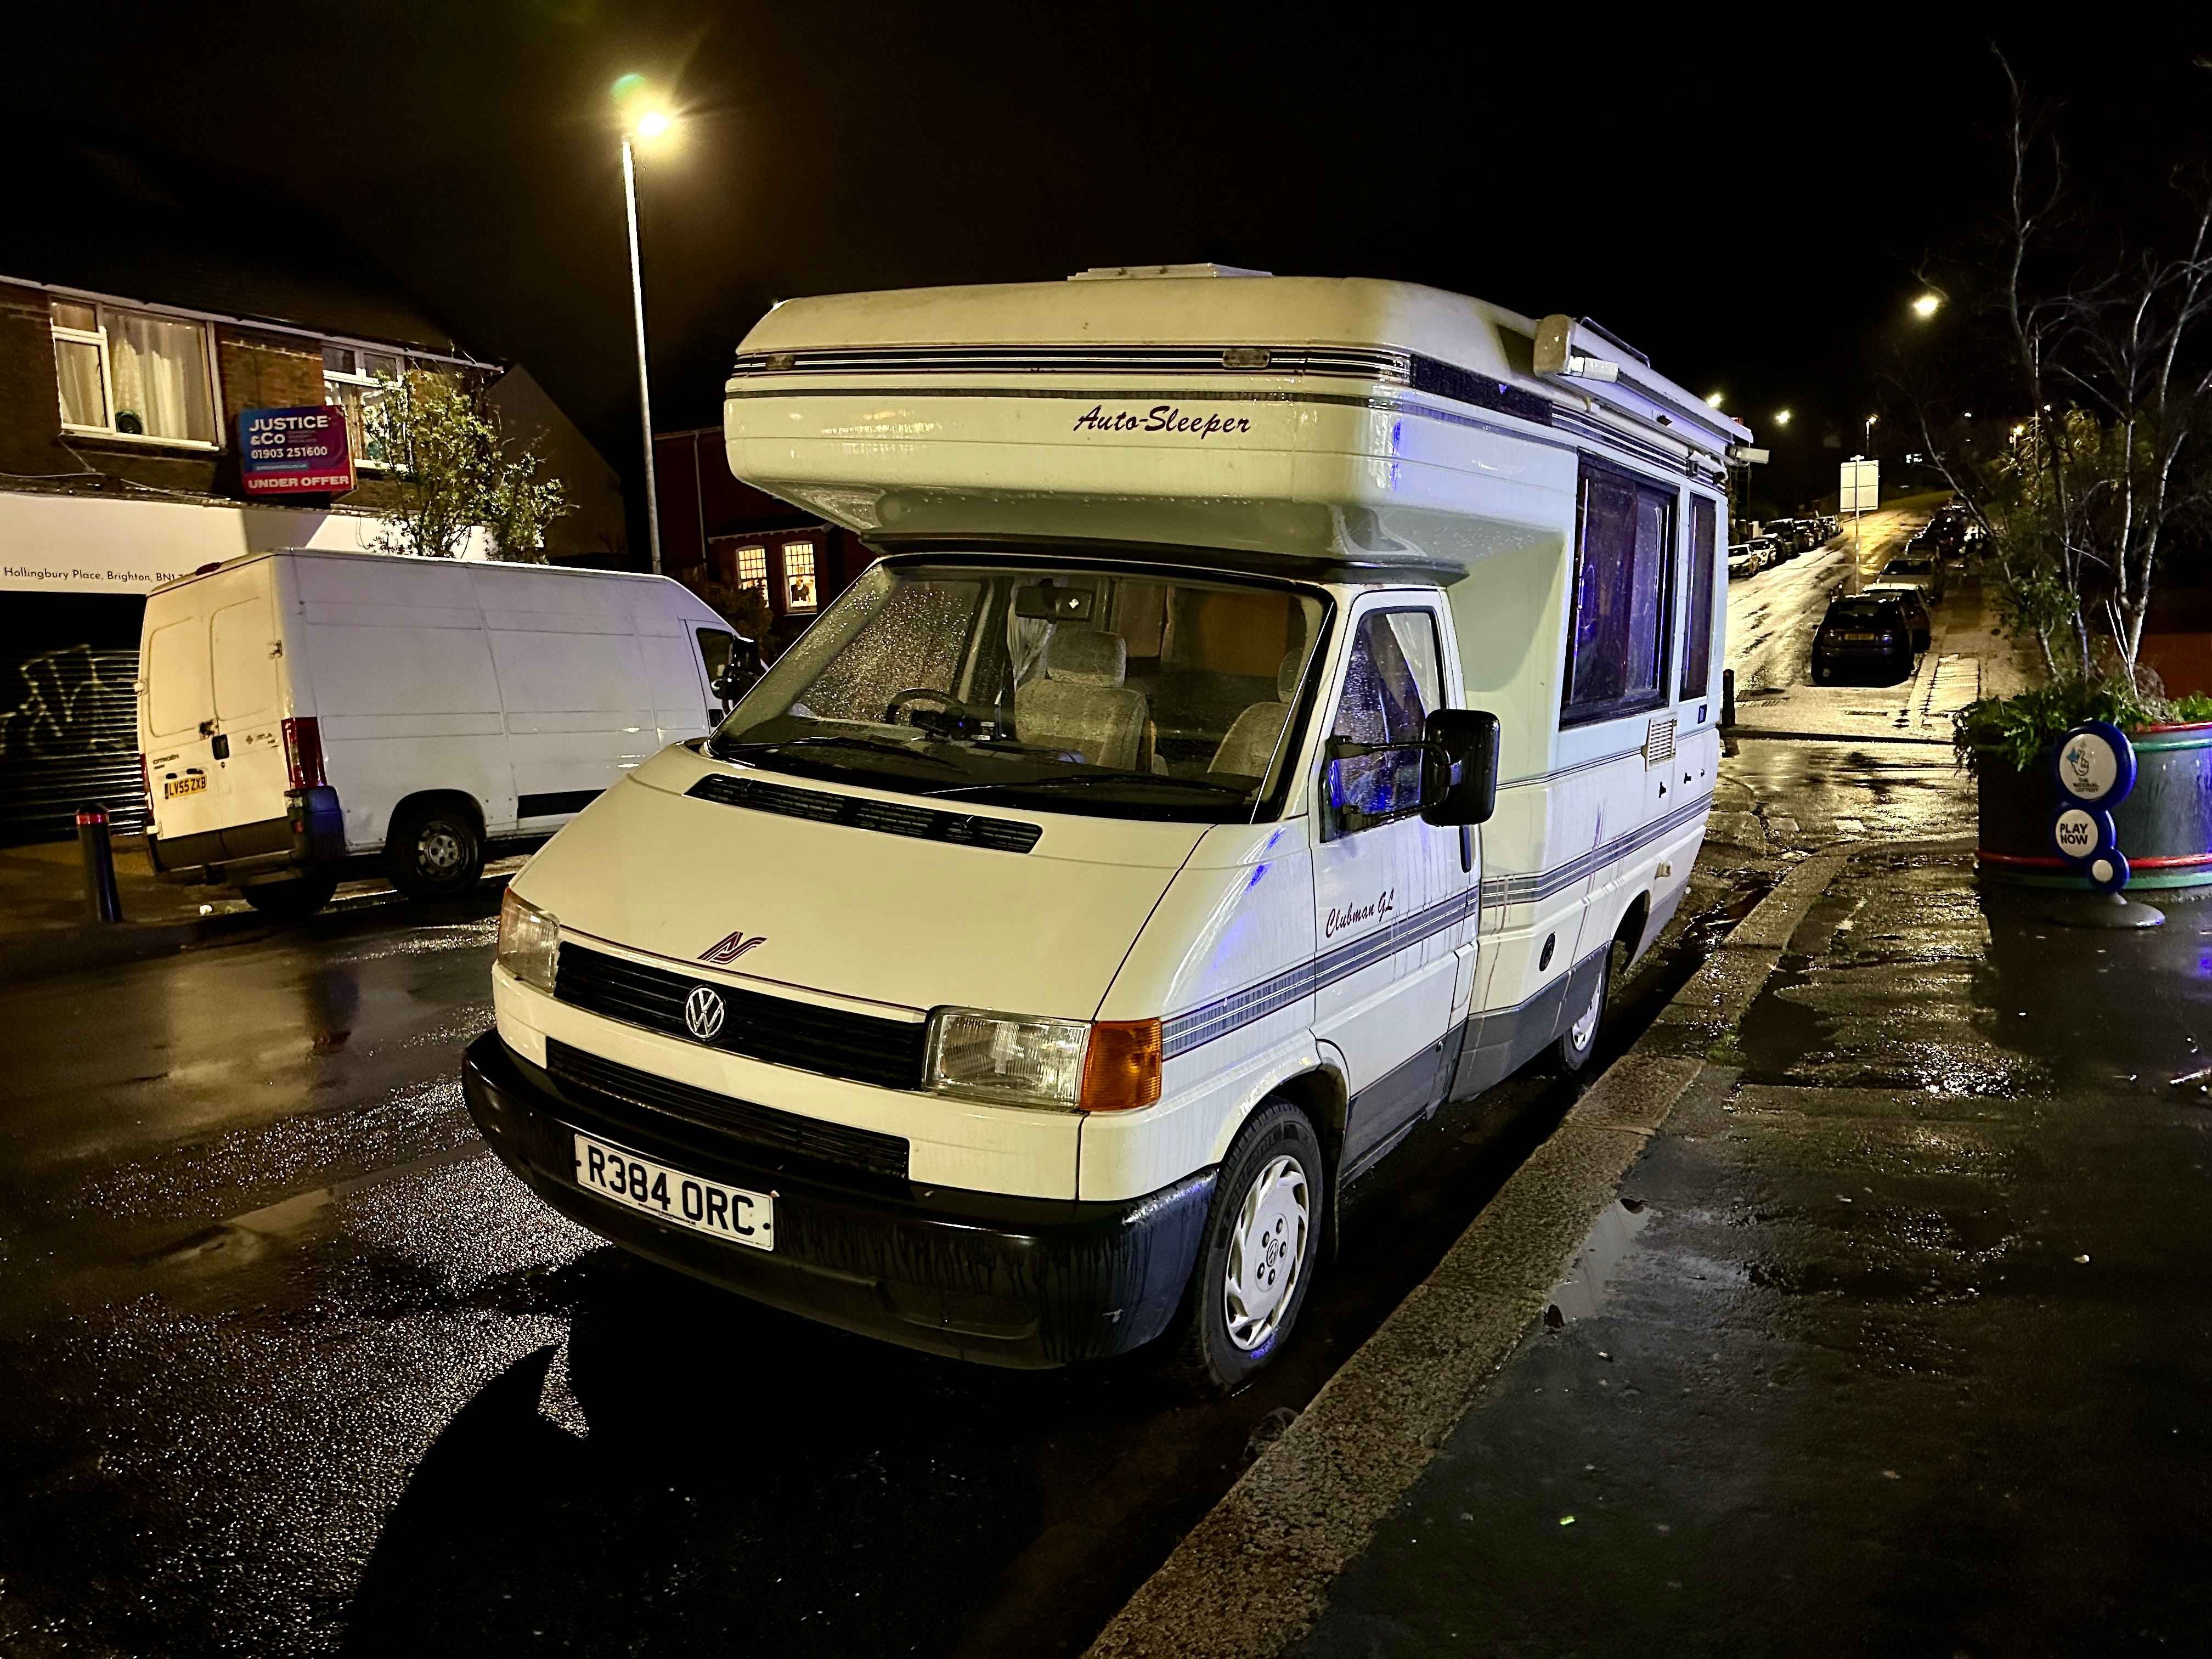 Photograph of R384 ORC - a Beige Volkswagen Transporter camper van parked in Hollingdean by a non-resident, and potentially abandoned. The eighth of twelve photographs supplied by the residents of Hollingdean.